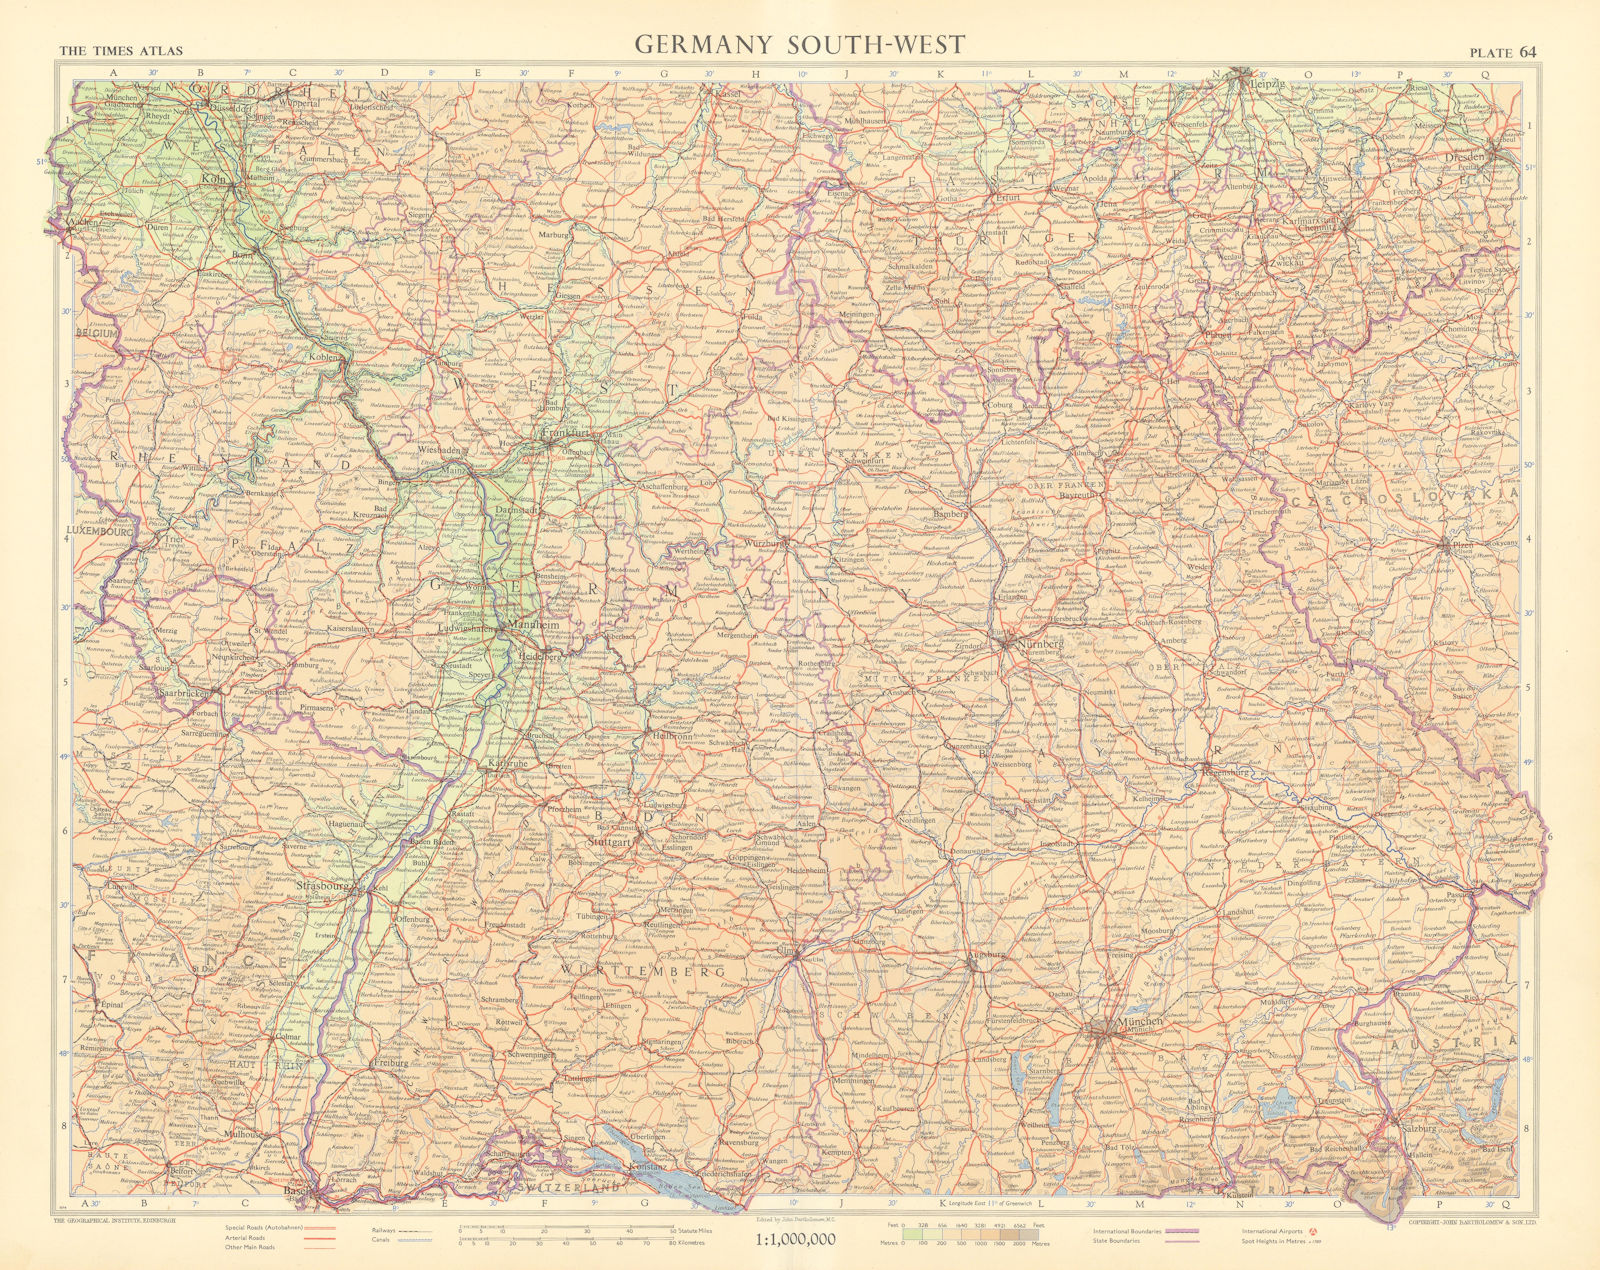 Germany south-west. Bavaria Bayern & Baden-Wurttemberg. TIMES 1955 old map